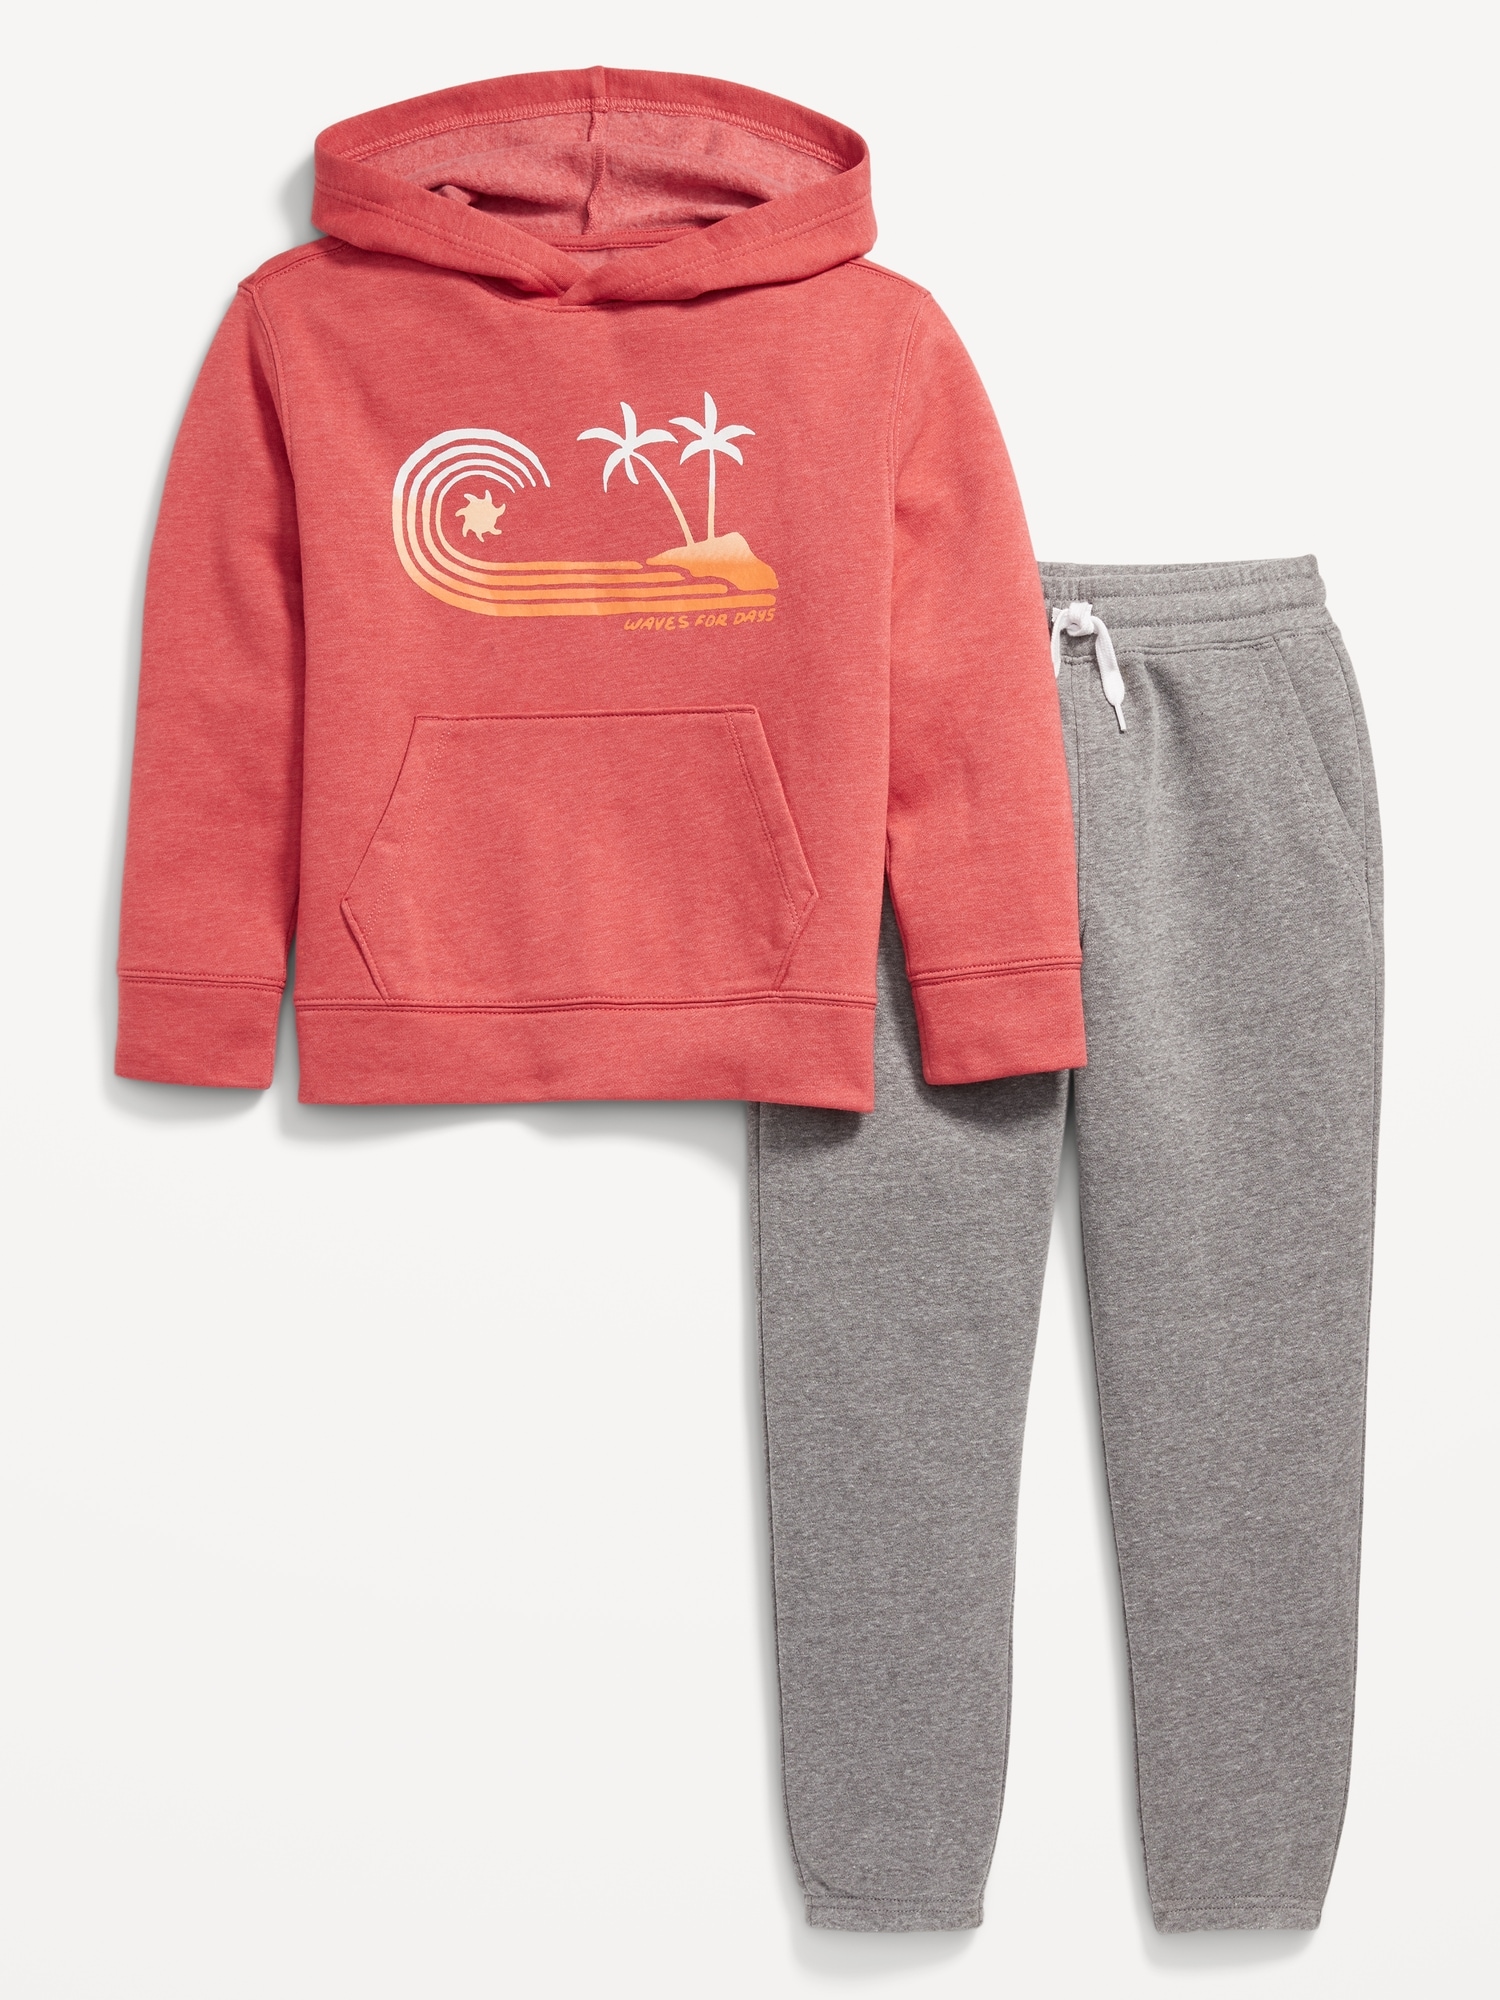 Fleece Graphic Hoodie and Sweatpants Set for Boys Hot Deal